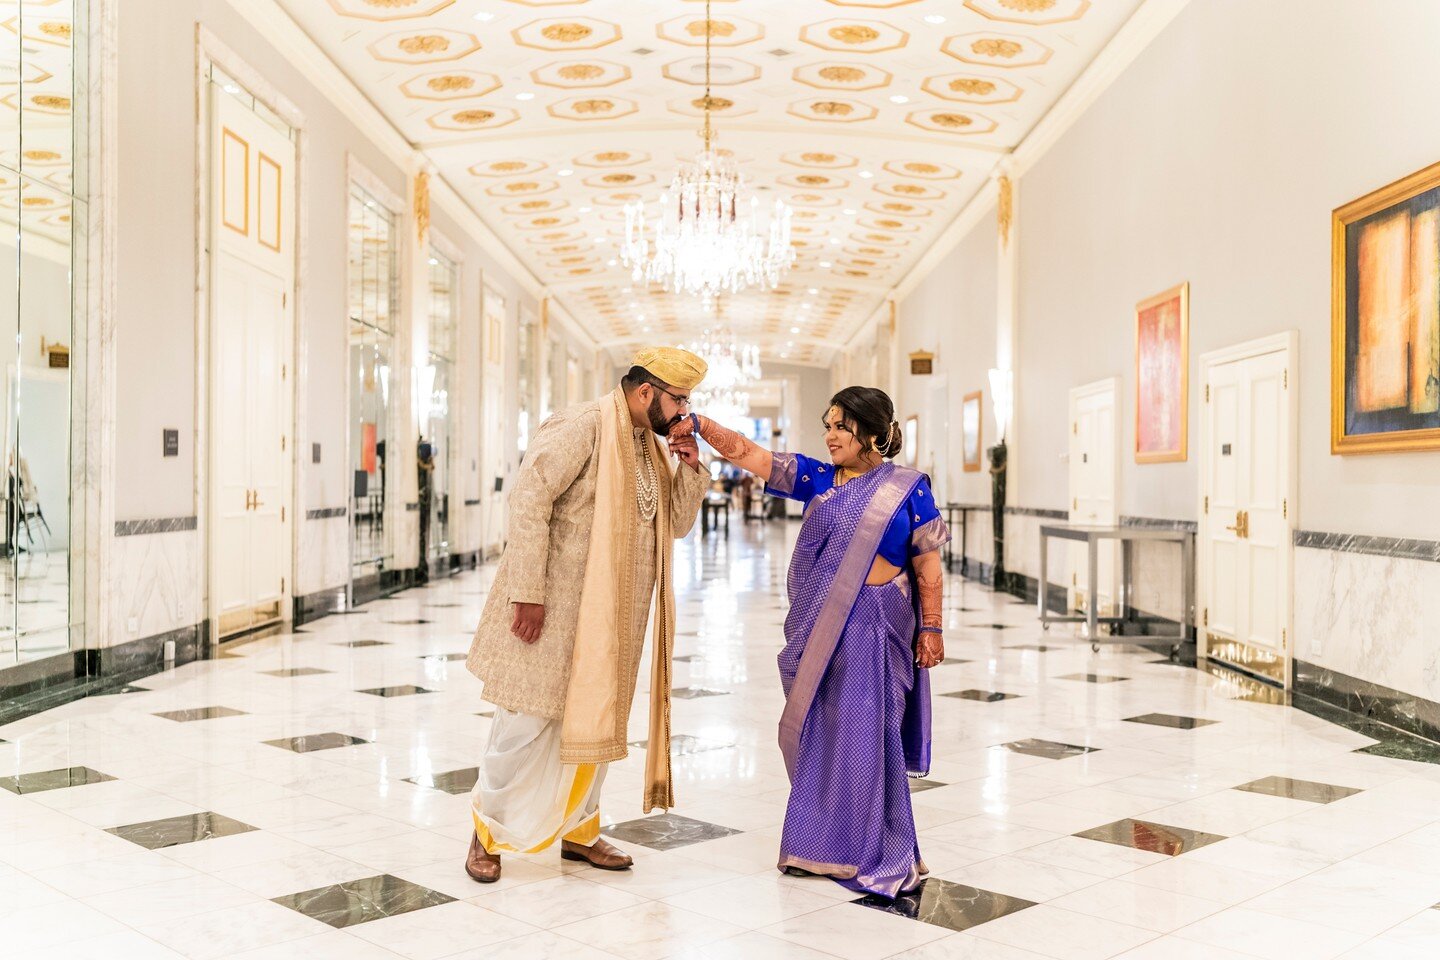 #weddingphotography enjoyed so much- Indian and Latin !!

As many know, I love those two cultures so much and I was so stoke that I could document vivid/vibrant moments for them. 

Como muchos saben, amo mucho esas dos culturas y me emocion&oacute; t